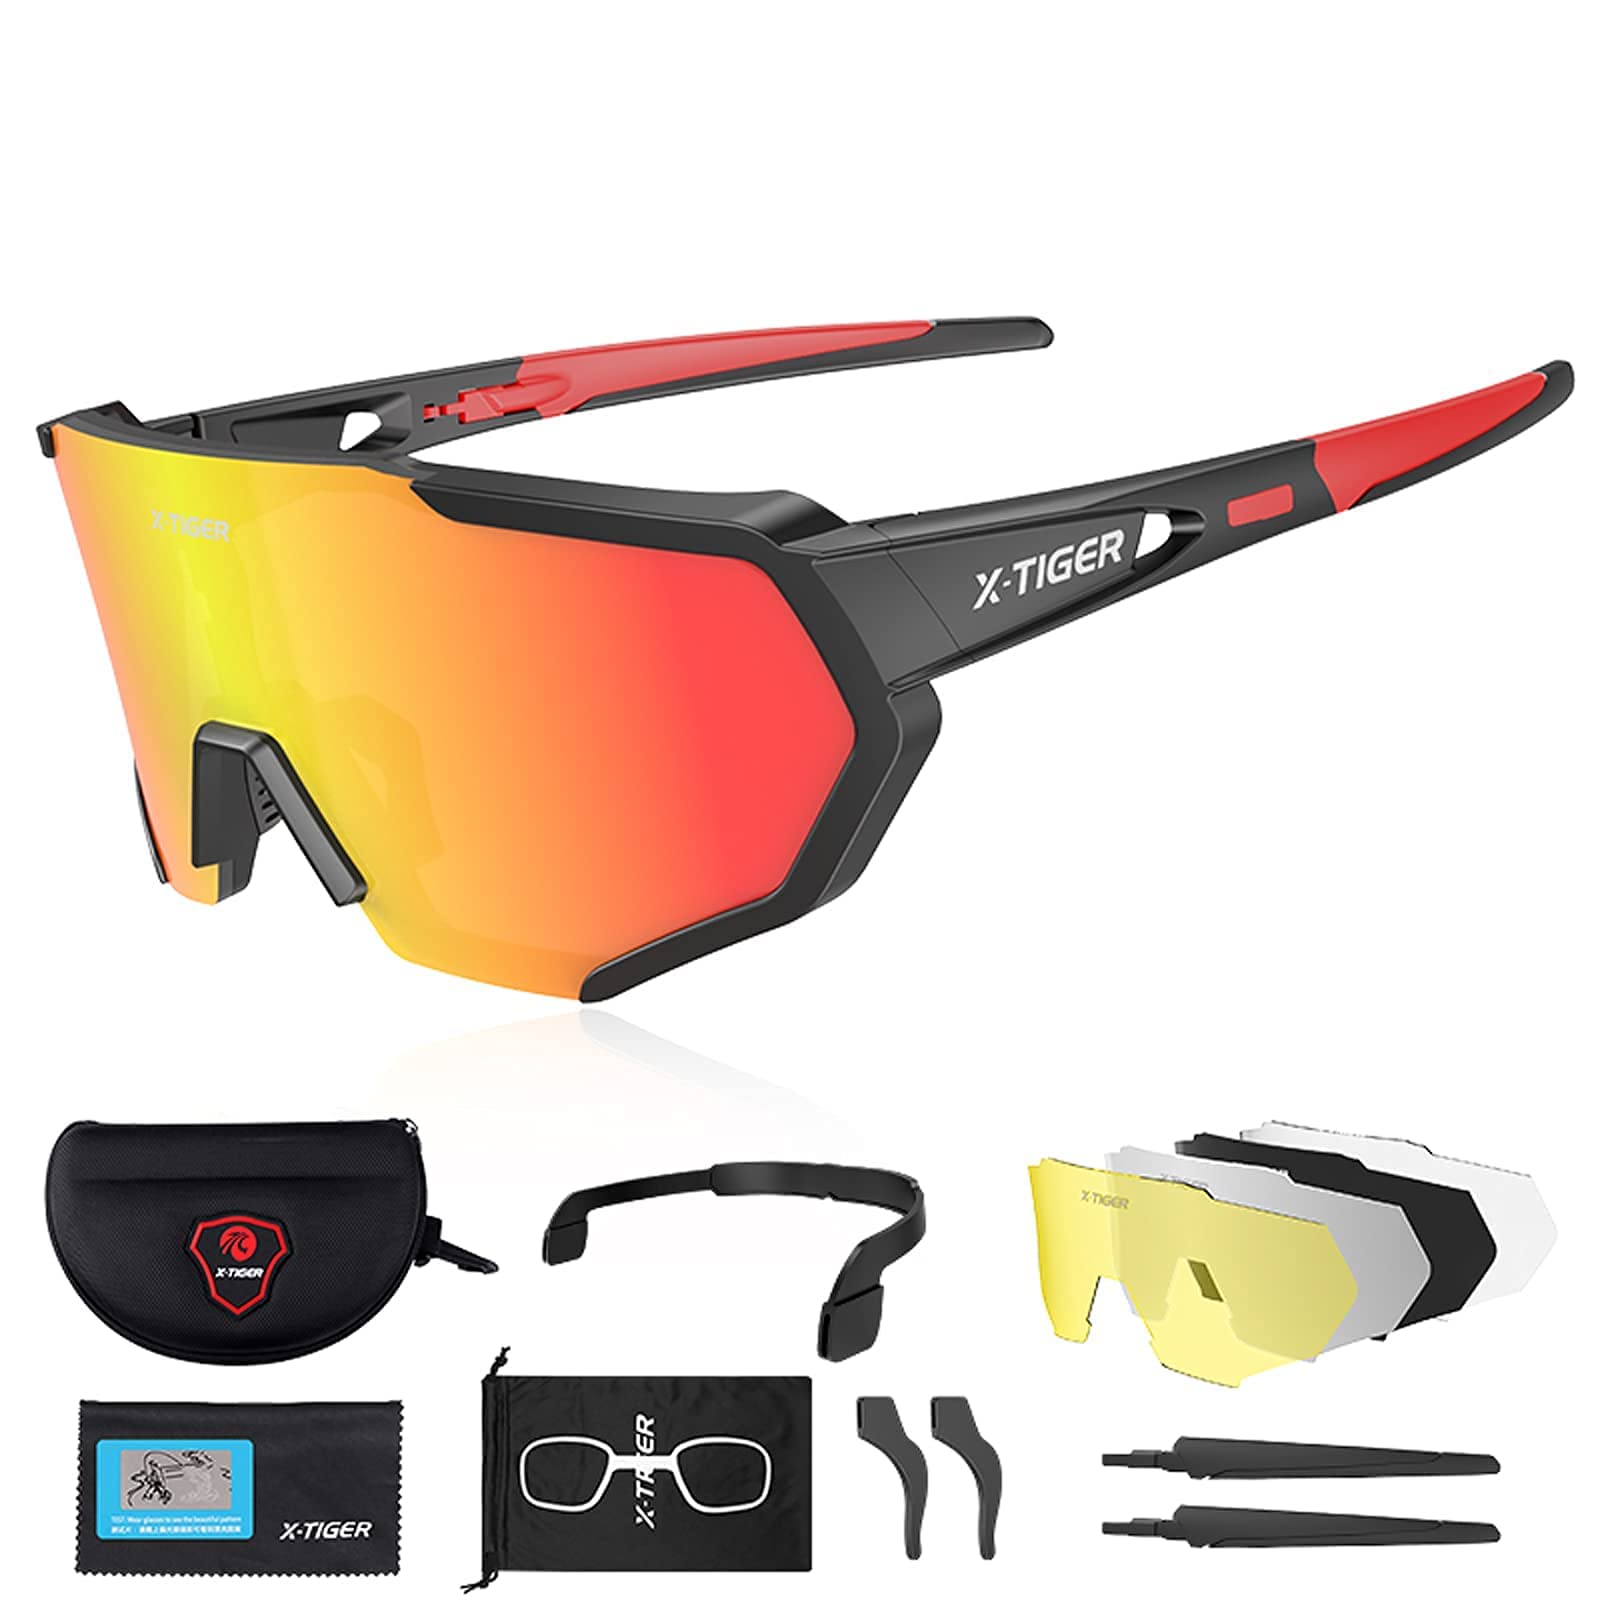 X-TIGER Polarized Sports Sunglasses 3 or 5 Interchangeable Lenses